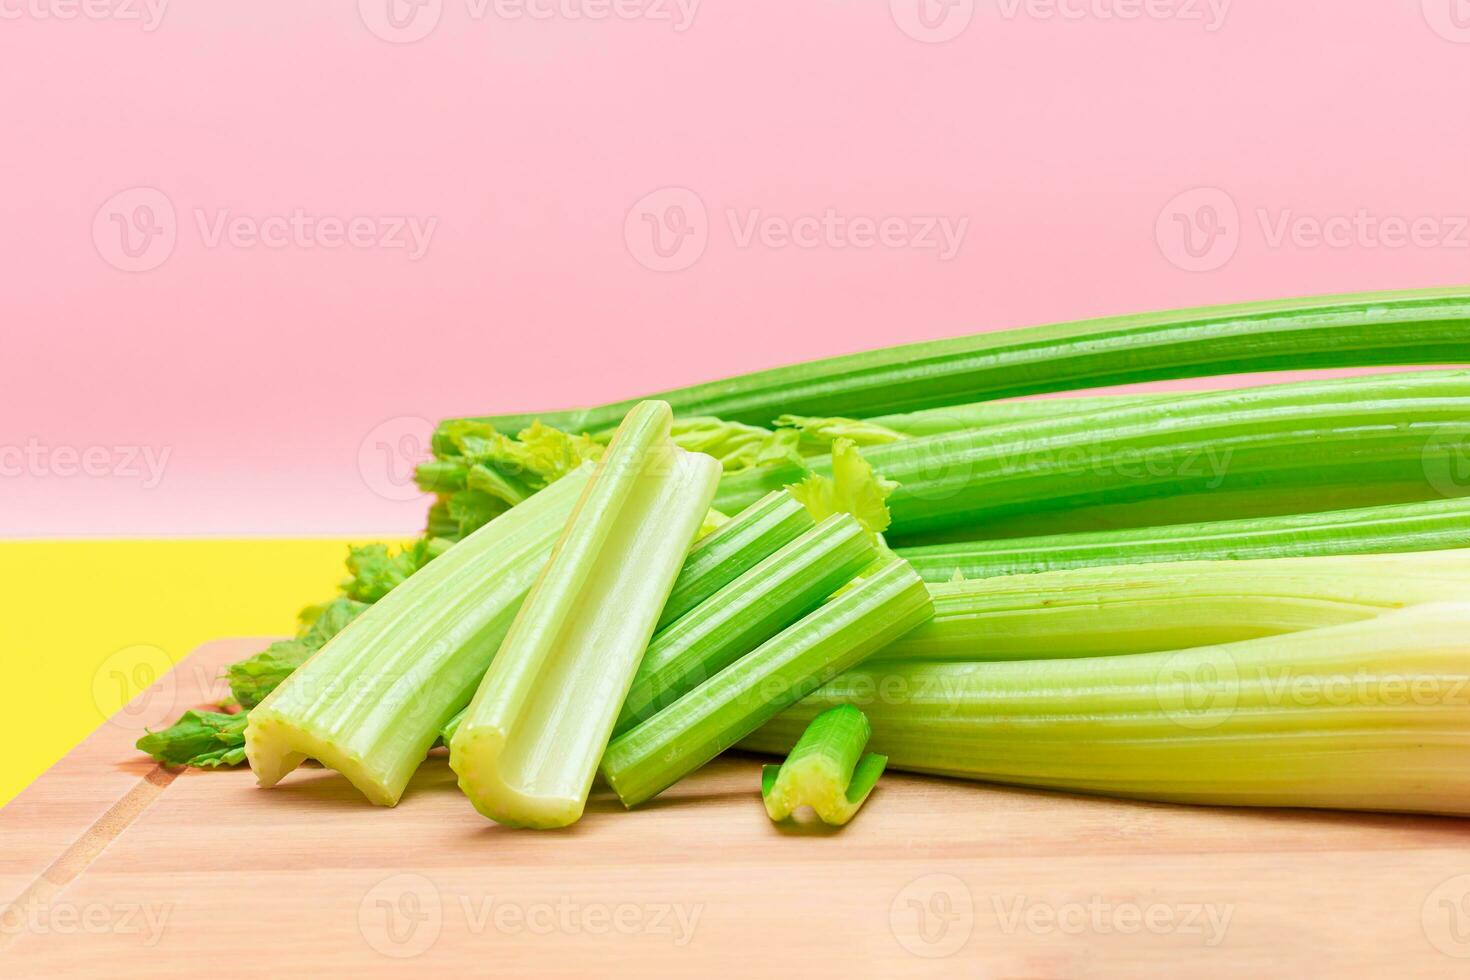 Fresh Celery Stem and Chopped Celery Sticks on Wooden Cutting Board. Vegan and Vegetarian Culture. Raw Food. Healthy Diet with Negative Calorie Content. Slimming Food photo